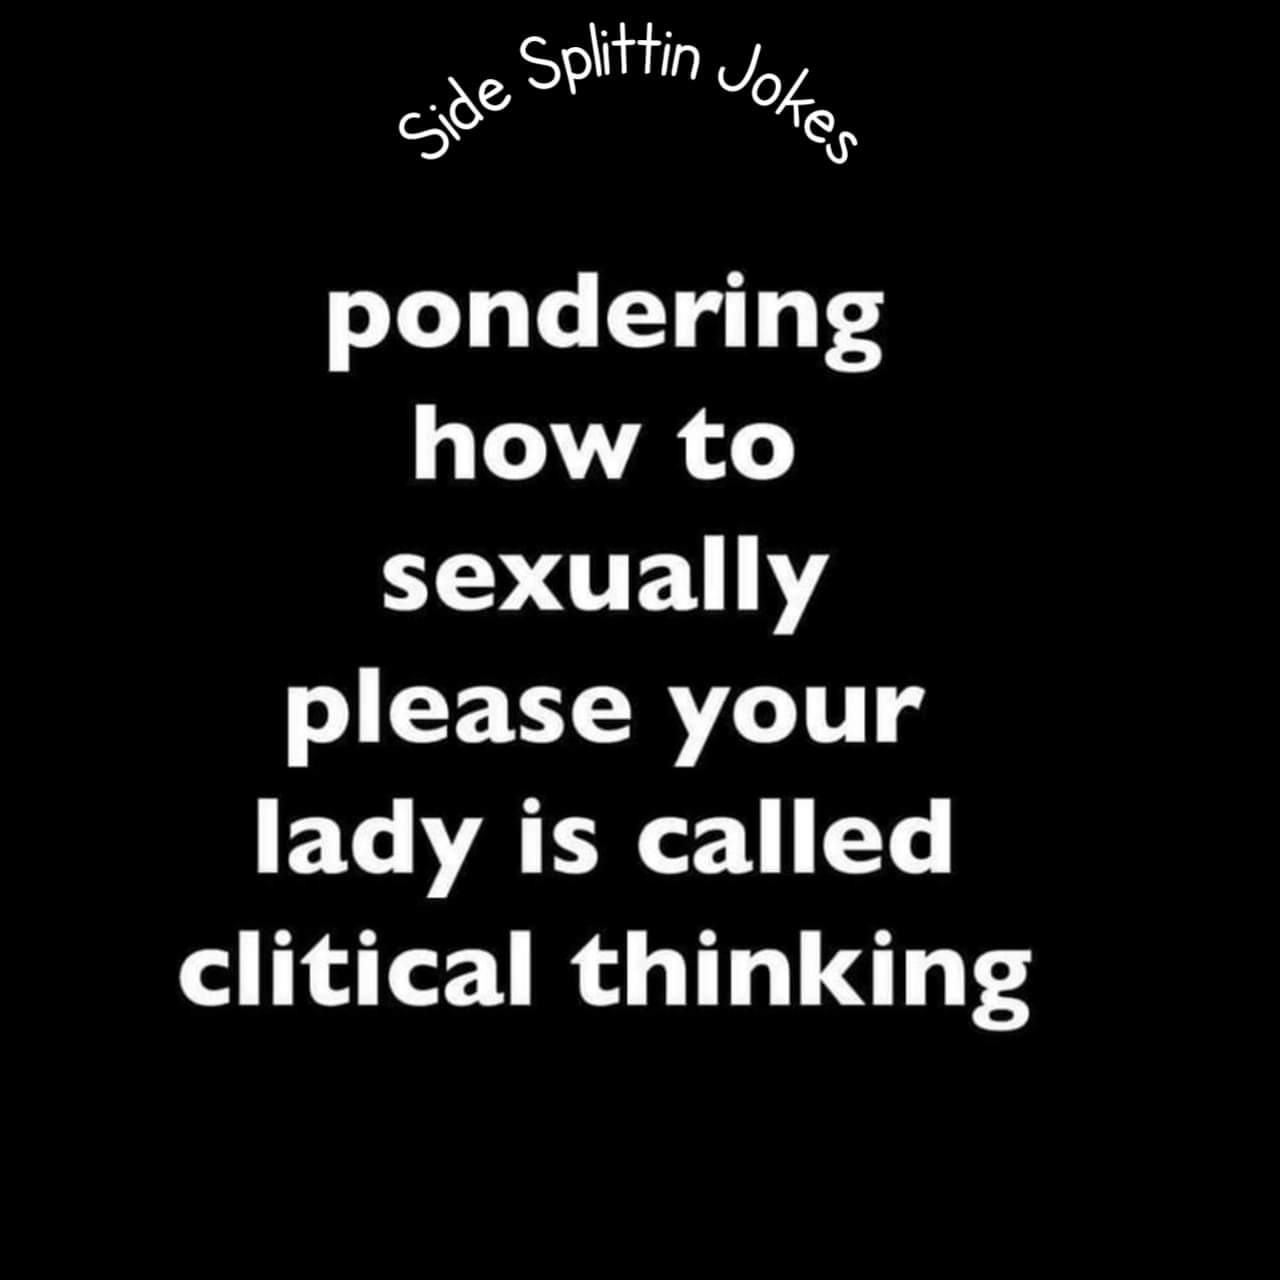 thirsty thursday adult memes - graphics - Side Splittin Jokes pondering how to sexually please your lady is called clitical thinking